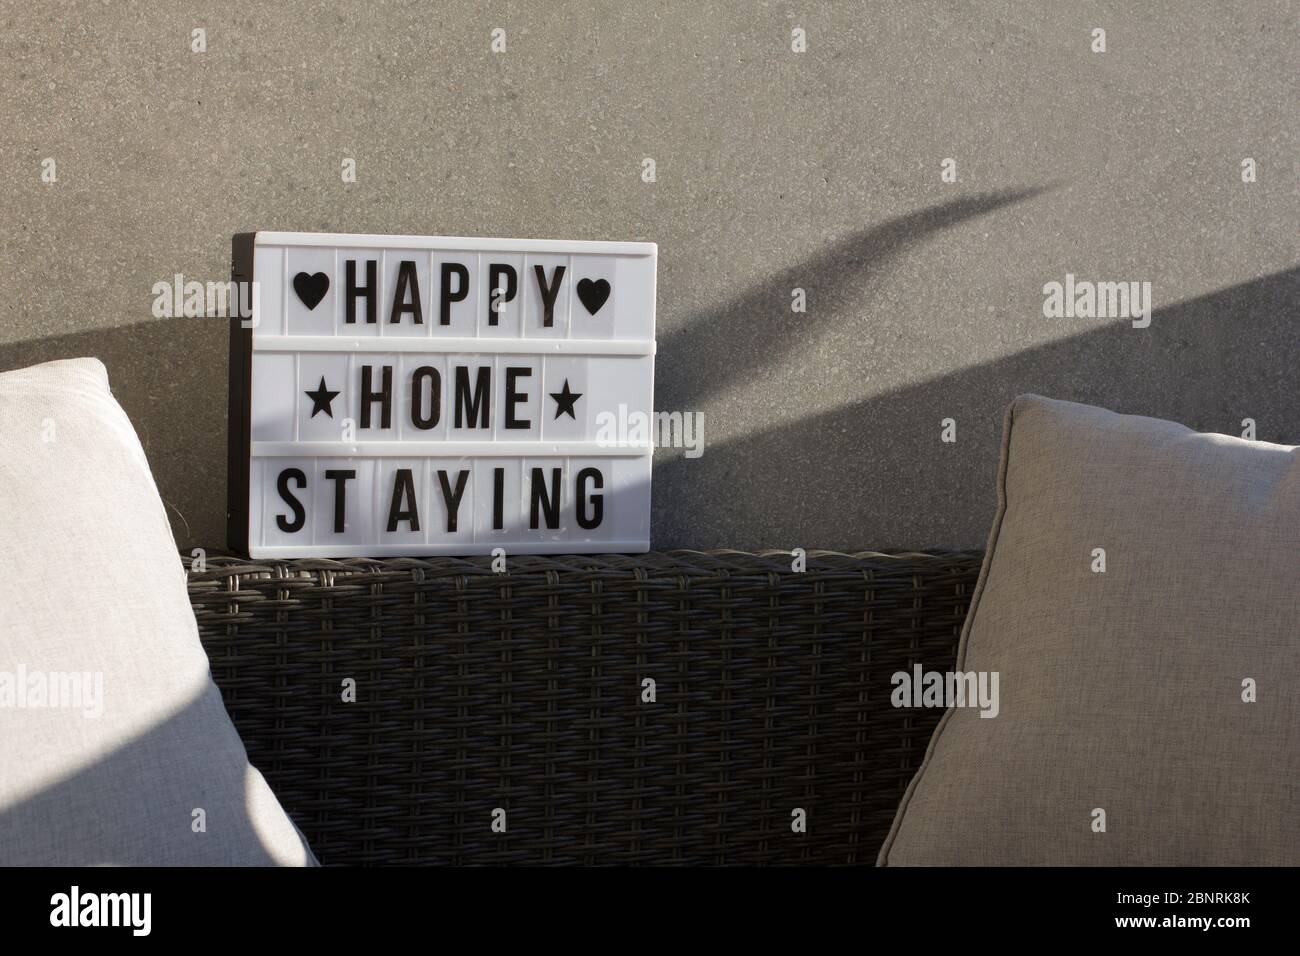 At home on the balcony, sign 'happy home staying' Stock Photo